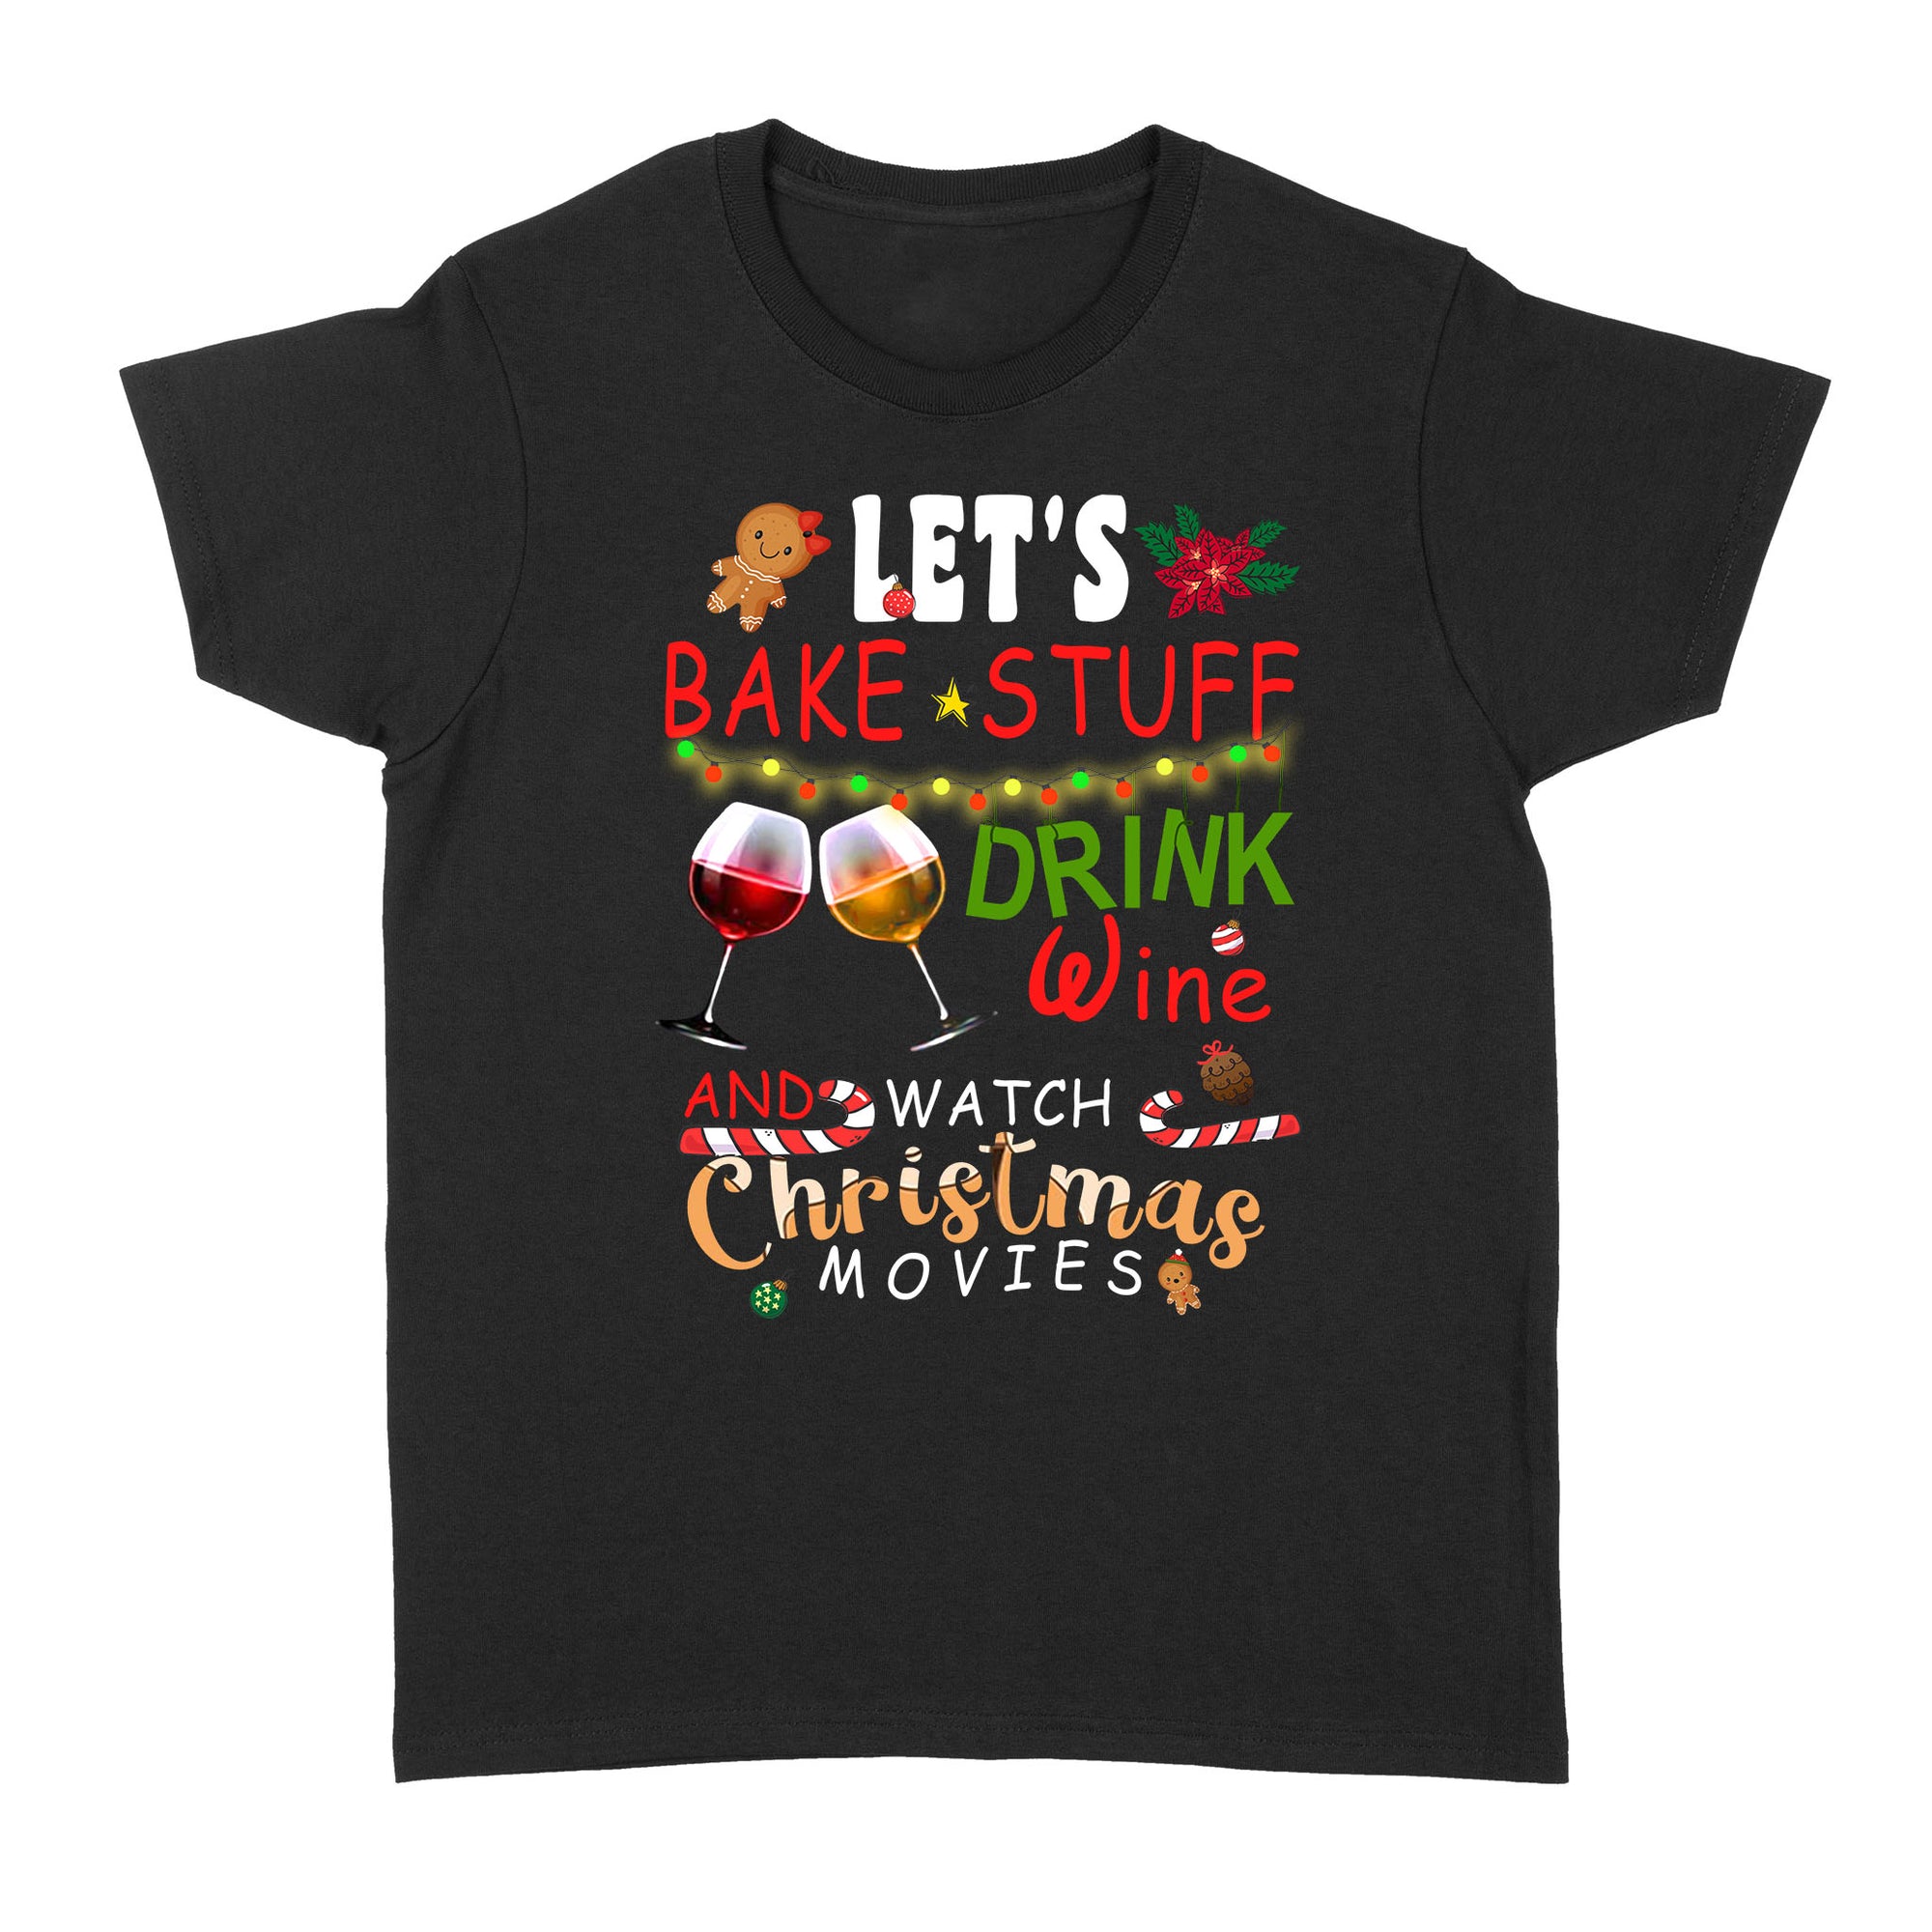 Funny Christmas Gifts Ideas Let's Bake Stuff Drink Wine And Watch Christmas Movies, XMas Christmas B - Standard Women's T-shirt